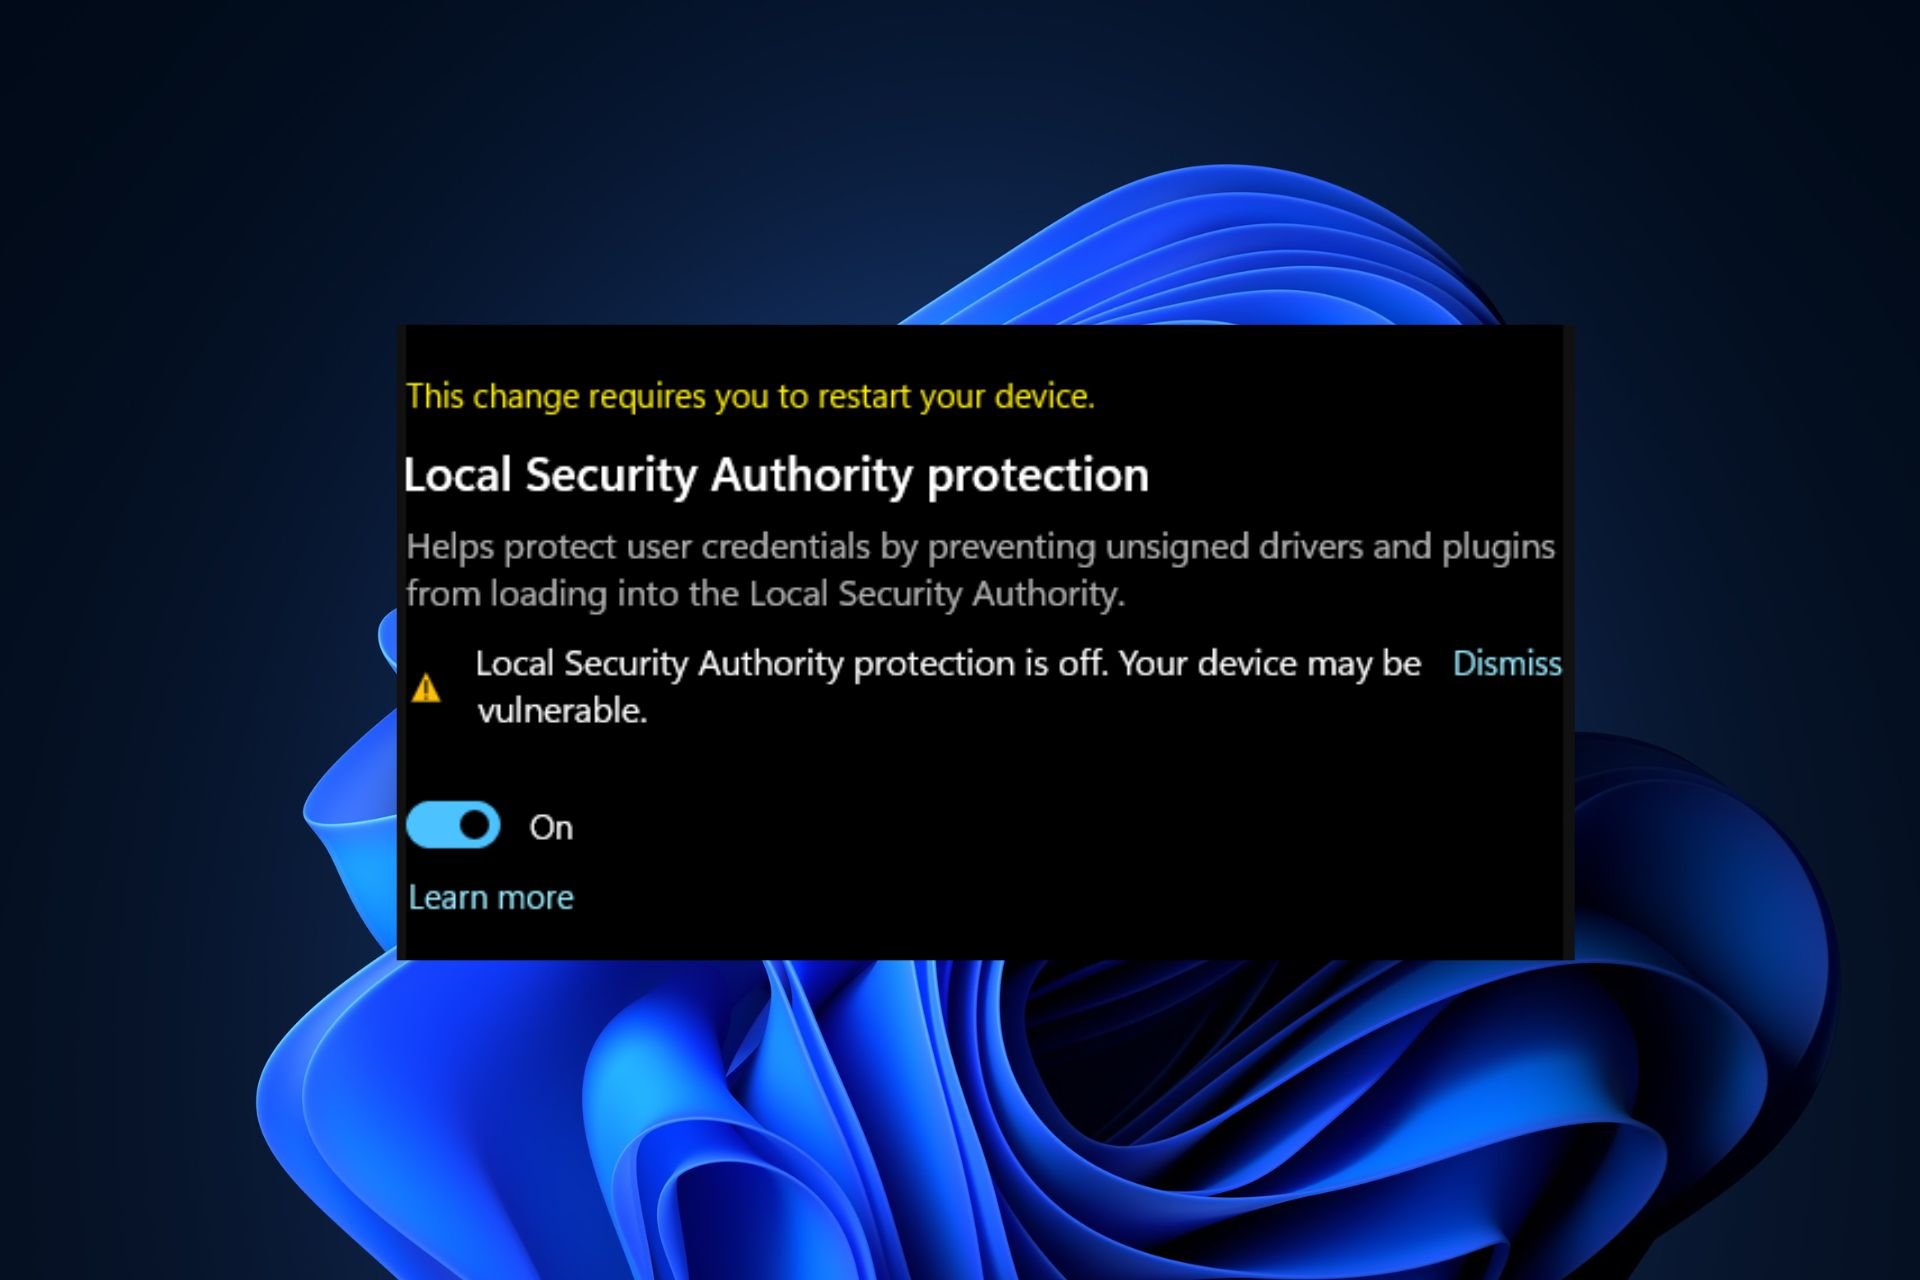 local security authority protection is off